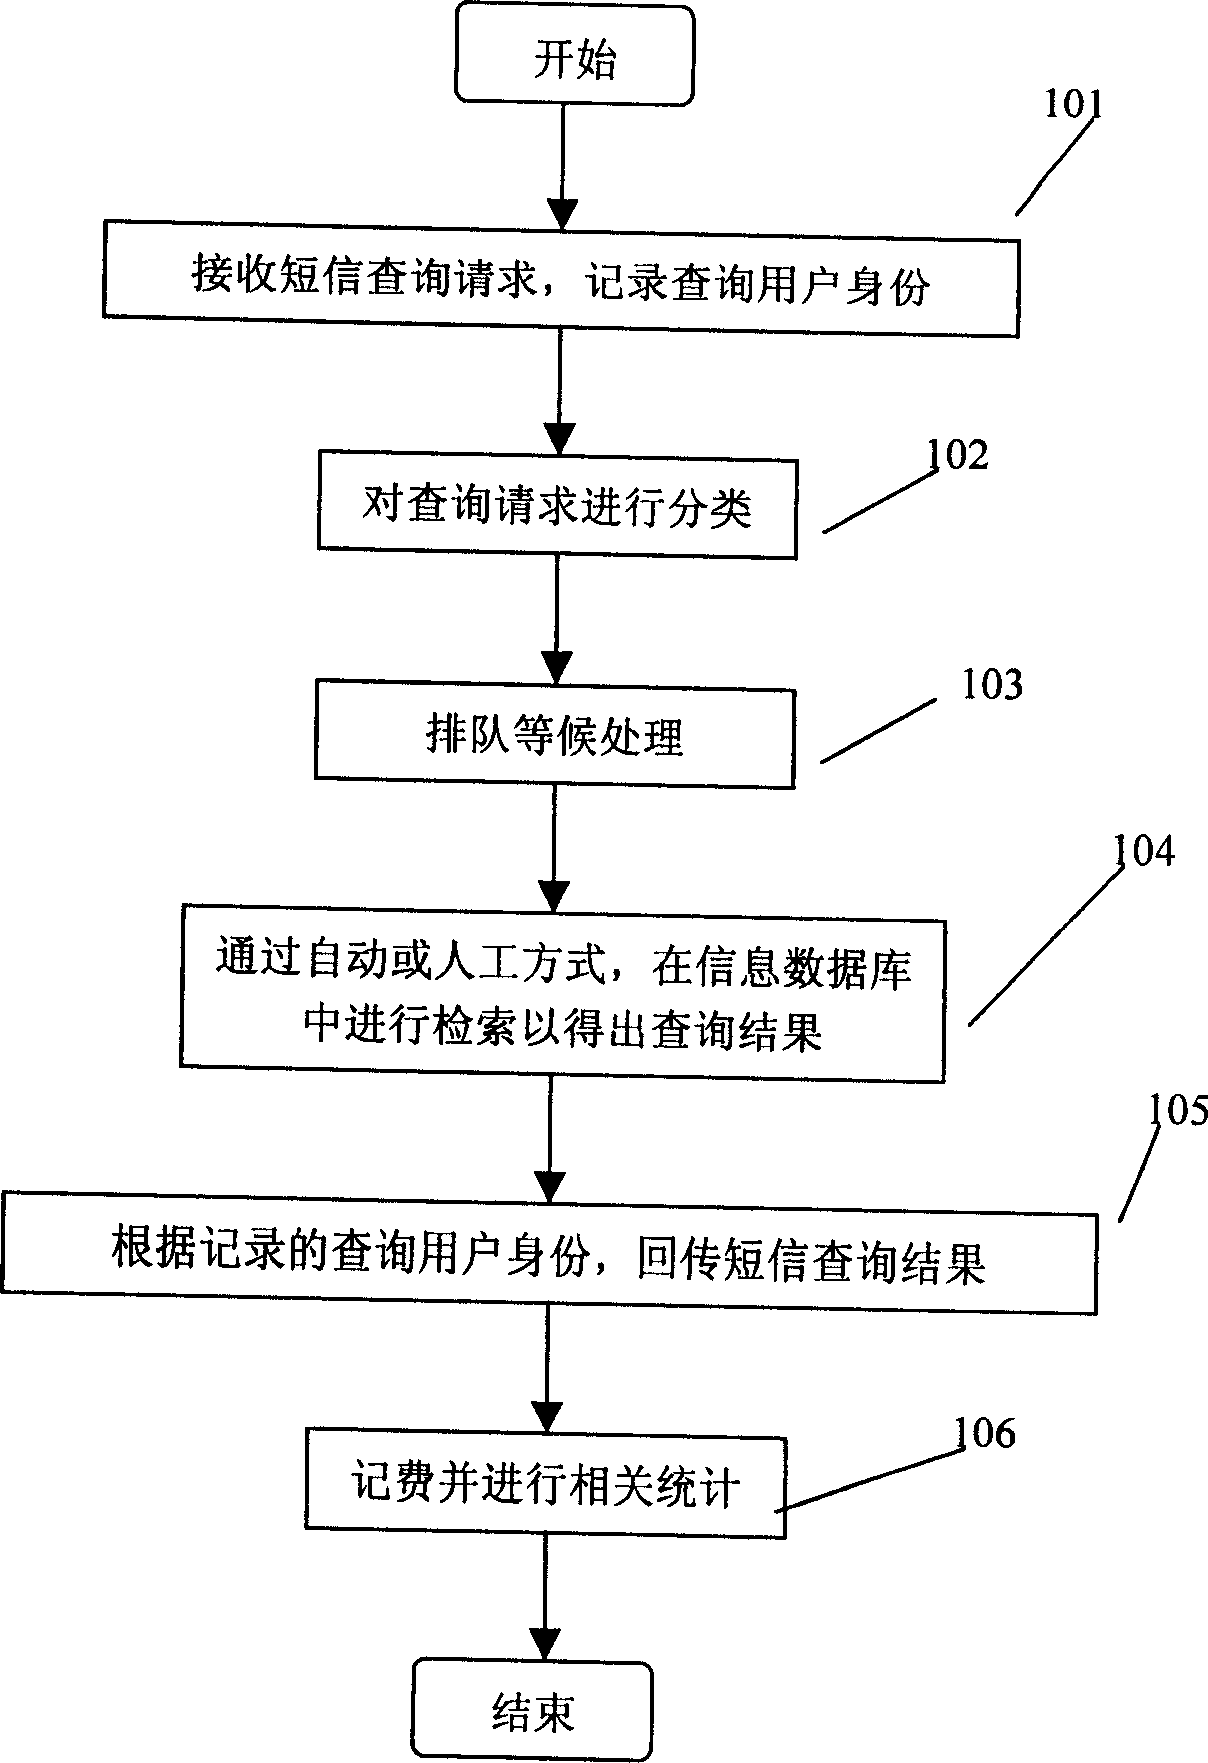 Call responding method using short message cut-in as main and relative call responding system